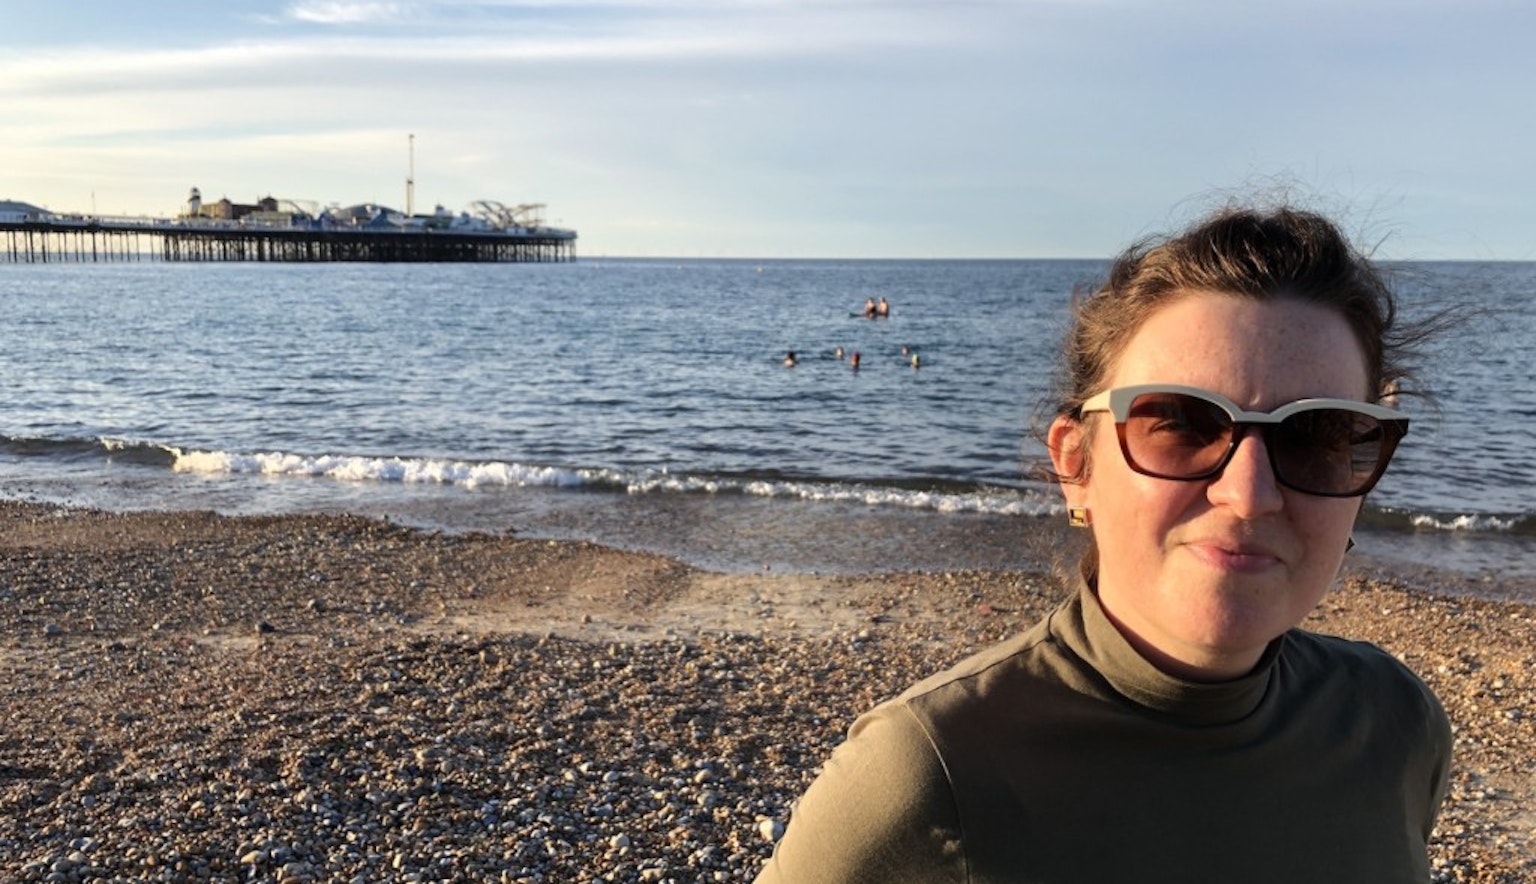 Anna Moulson stands to the right with sunglasses on looking at the camera. She is on a rocky beach. behind her is the ocean and a pier far off to the left.